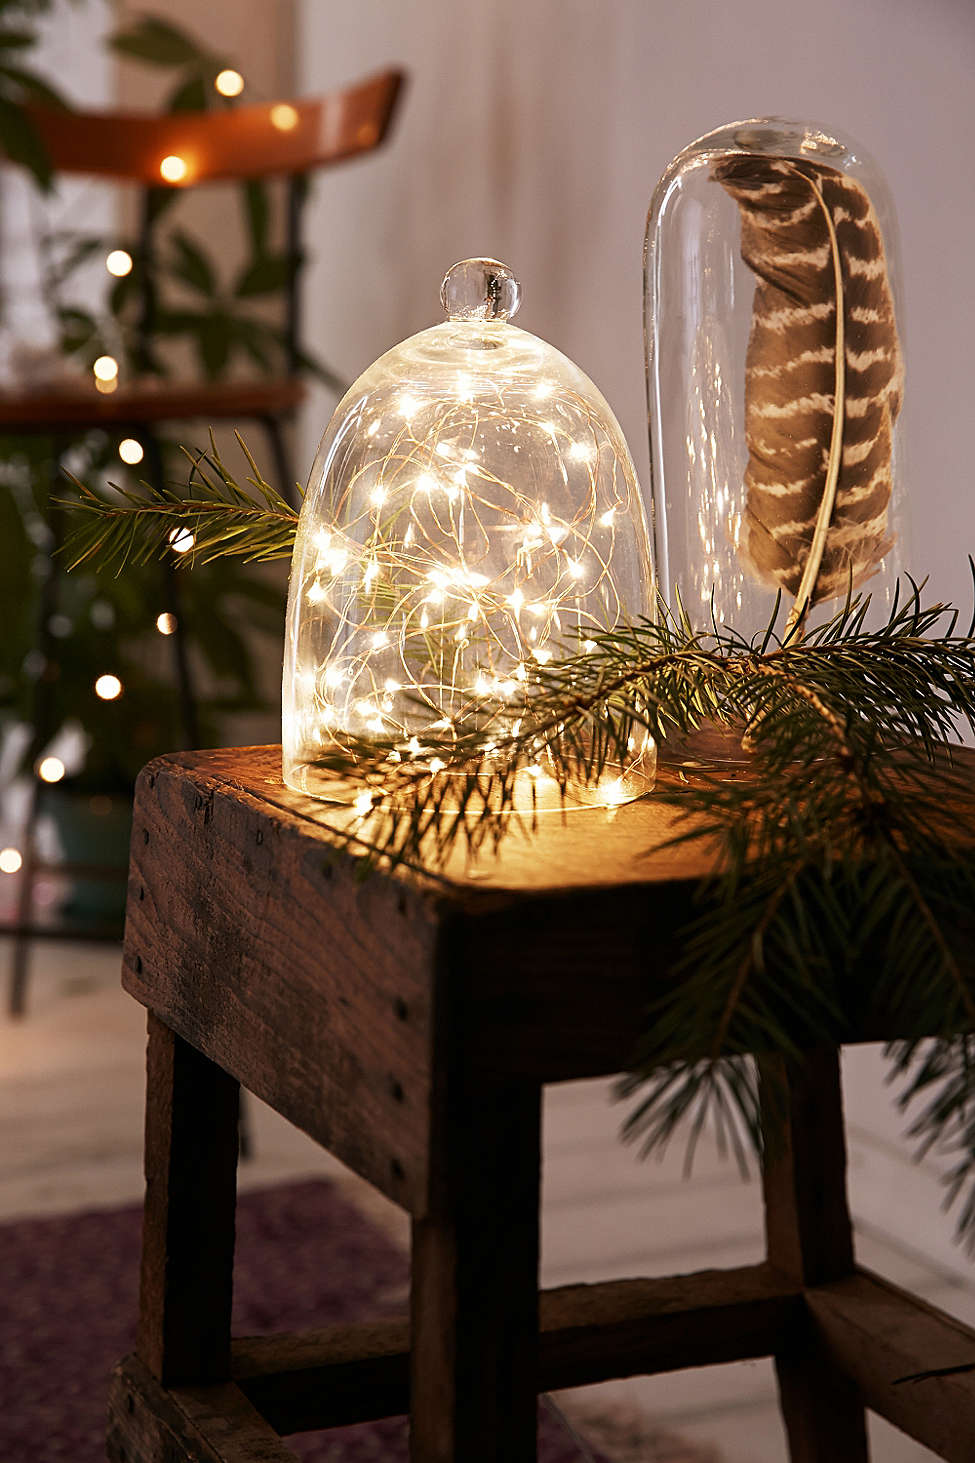 A terrarium is storing glowing holiday decoration string lights on a wooden table in a small apartment.